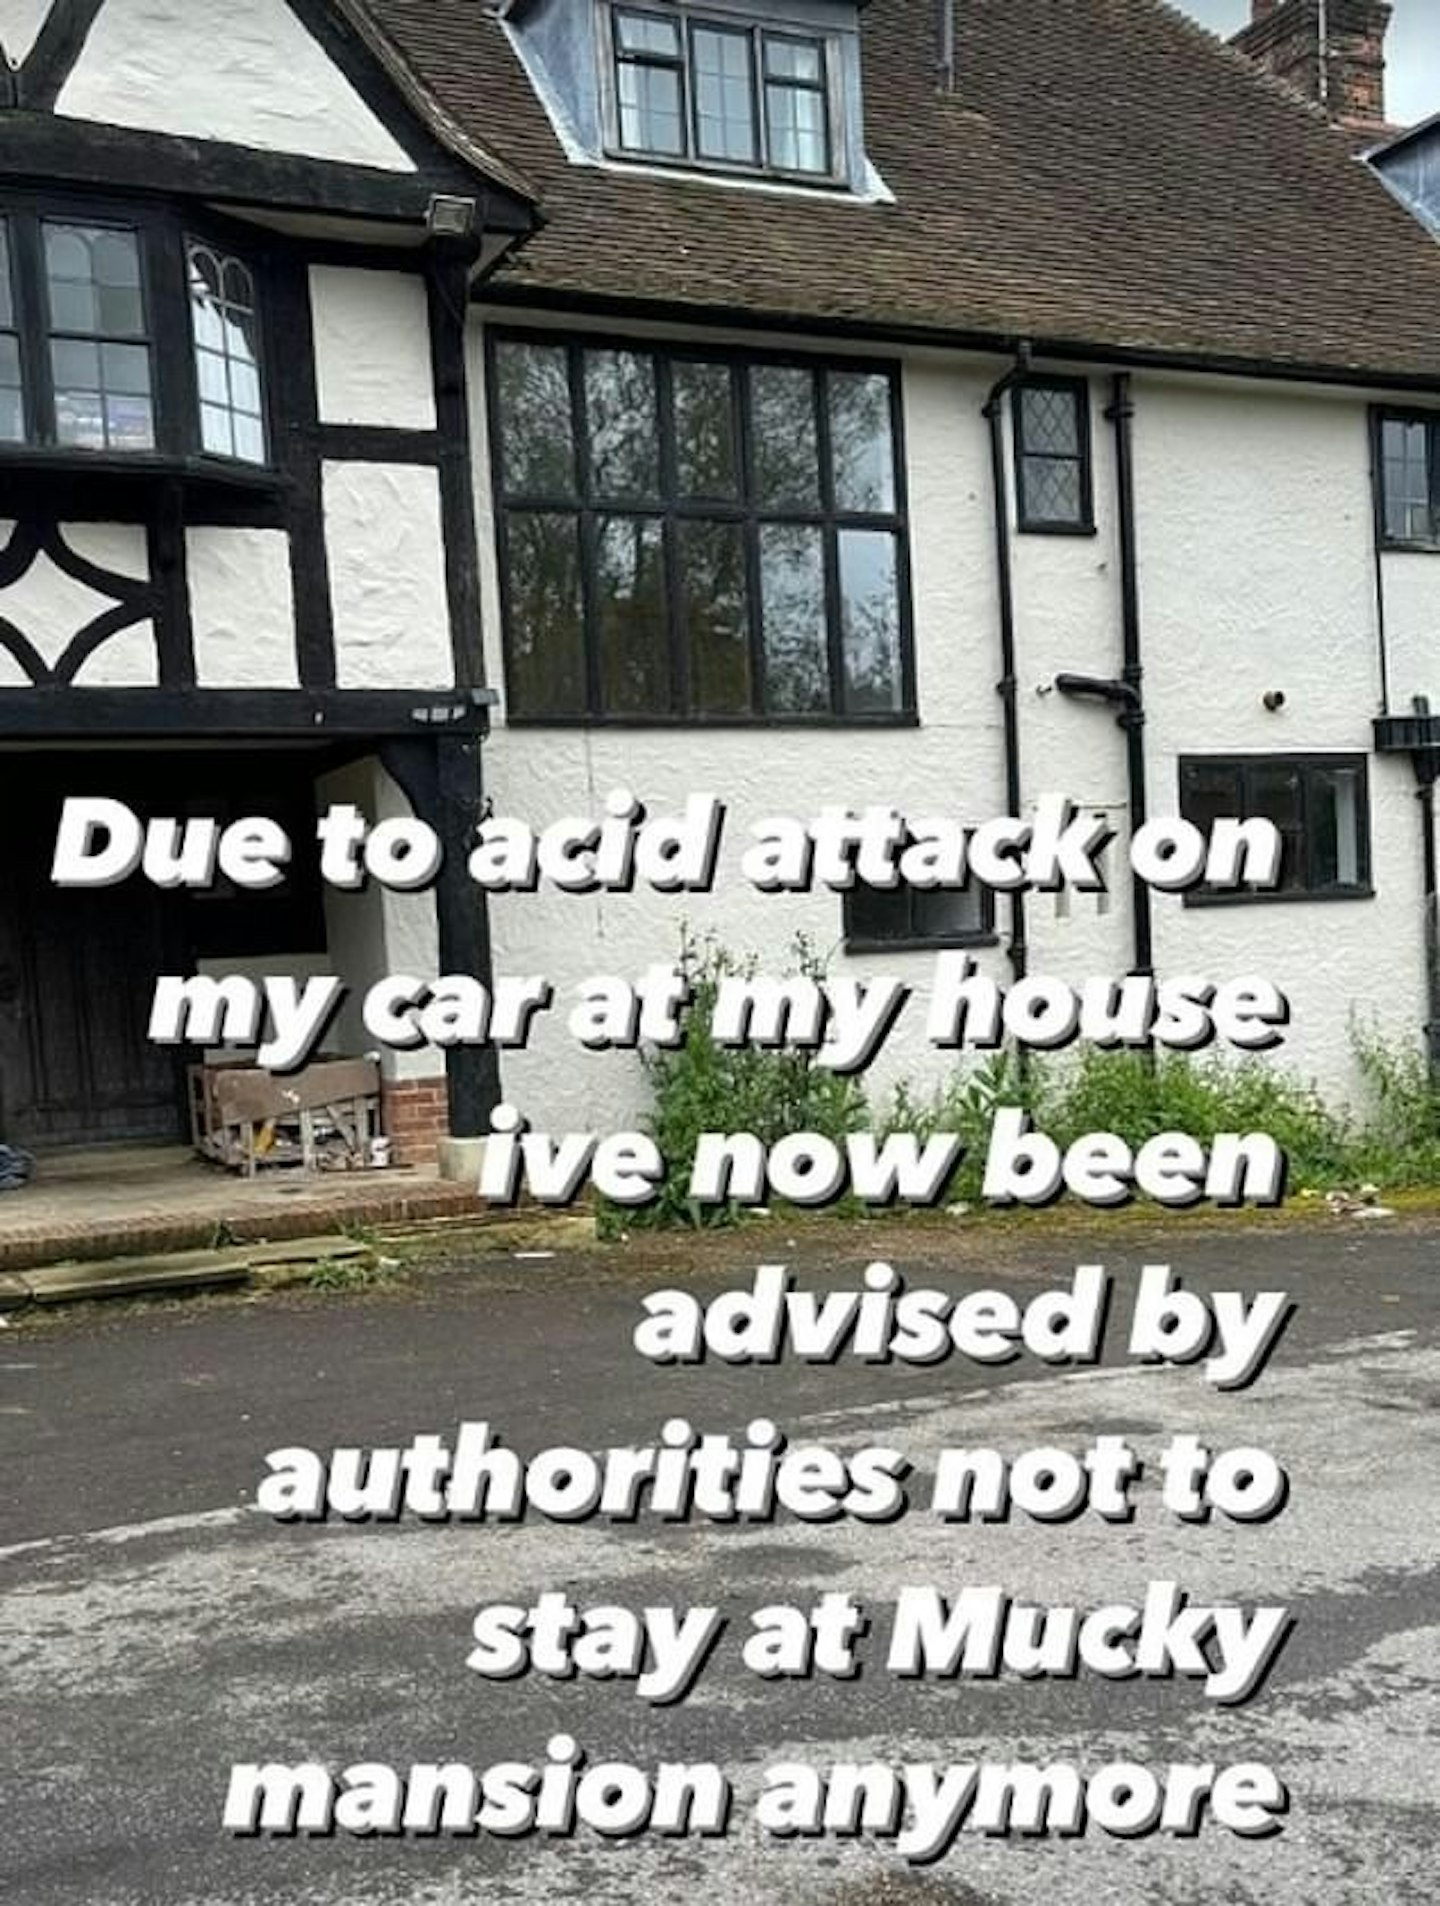 Katie Price's Instagram story about her Mucky Mansion